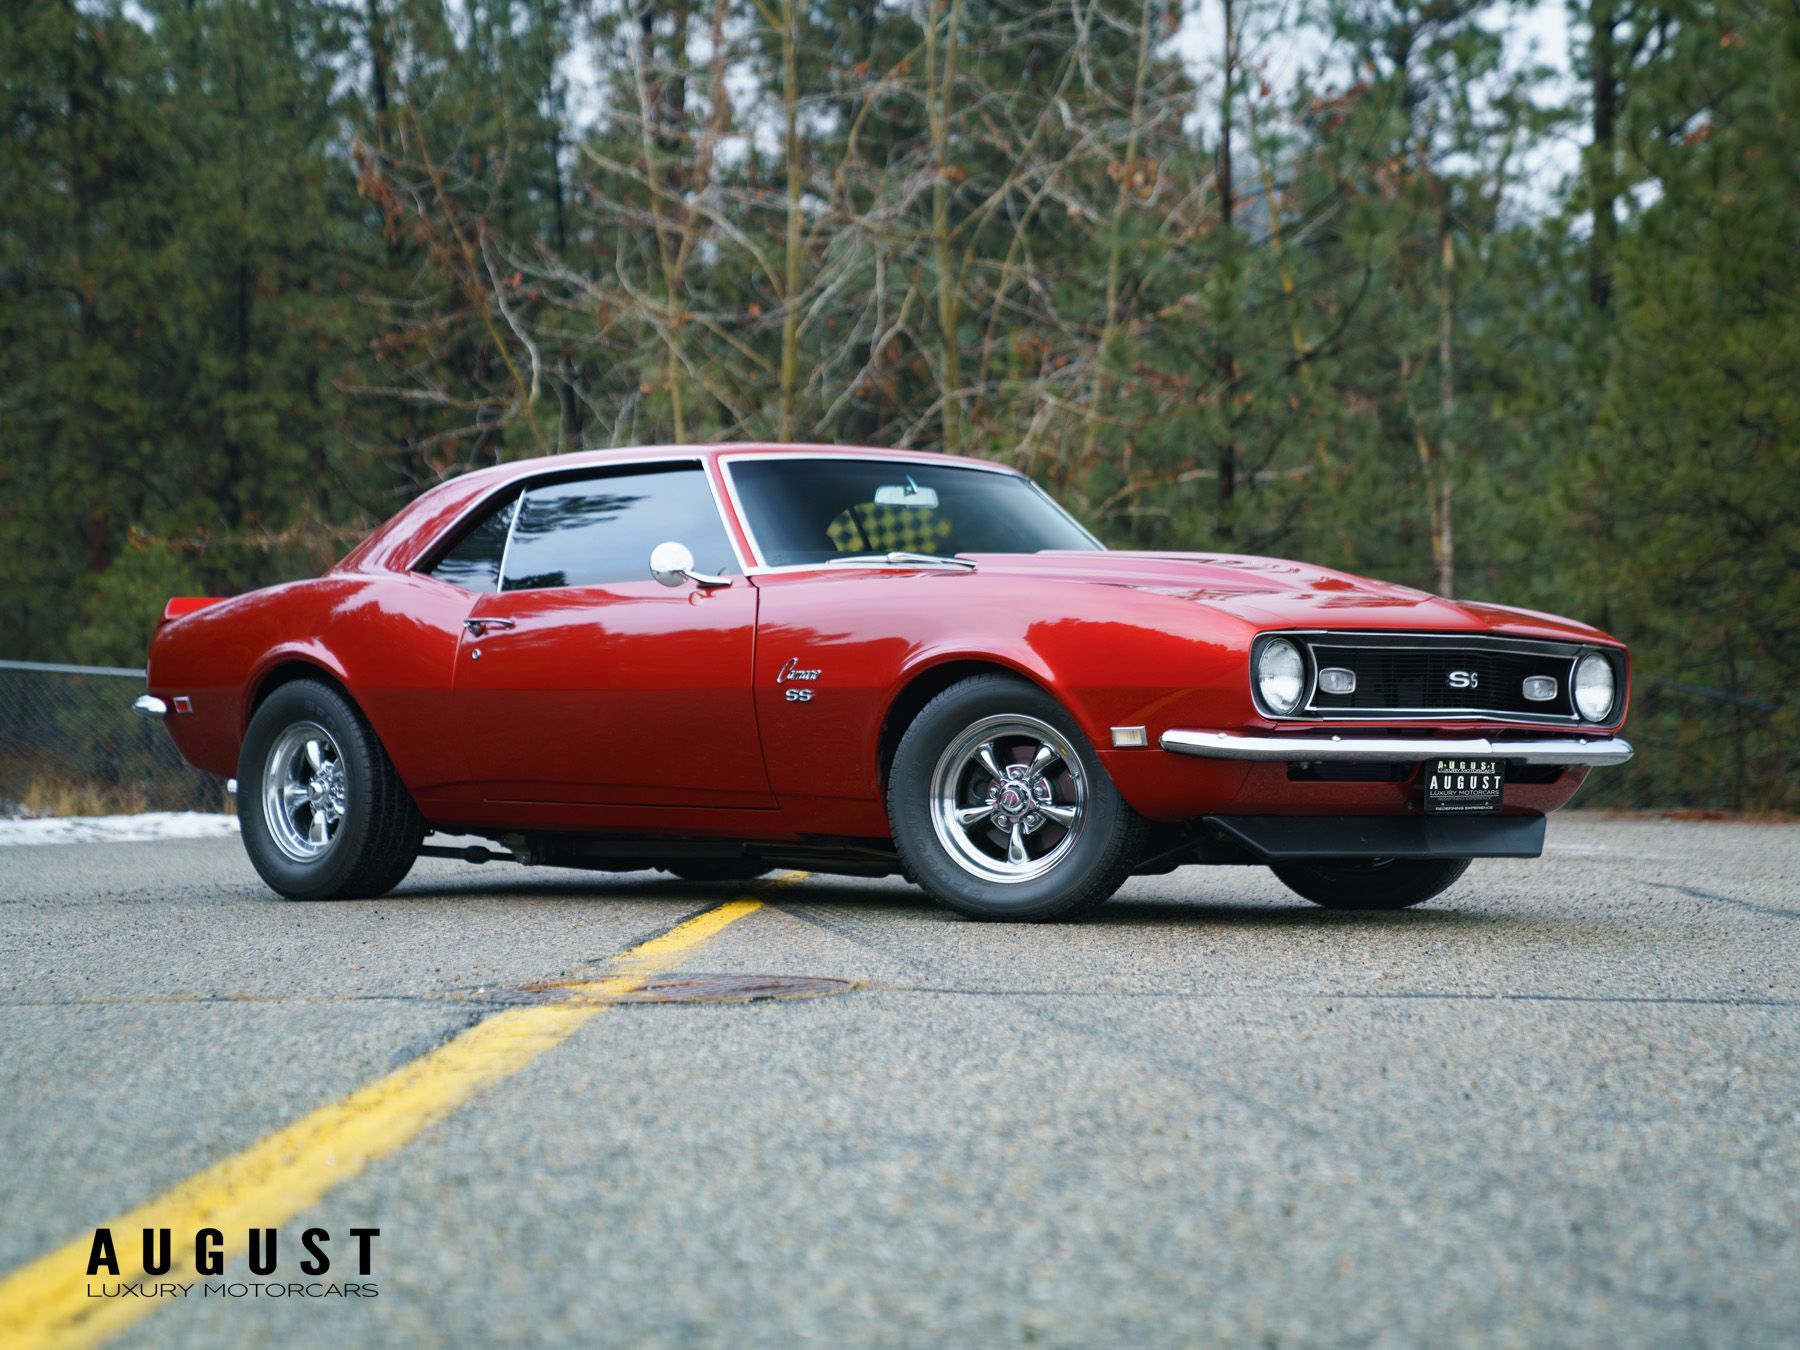 1968 Chevrolet Camaro Fully Restored With a 454 Big Block and Tremec 5 s